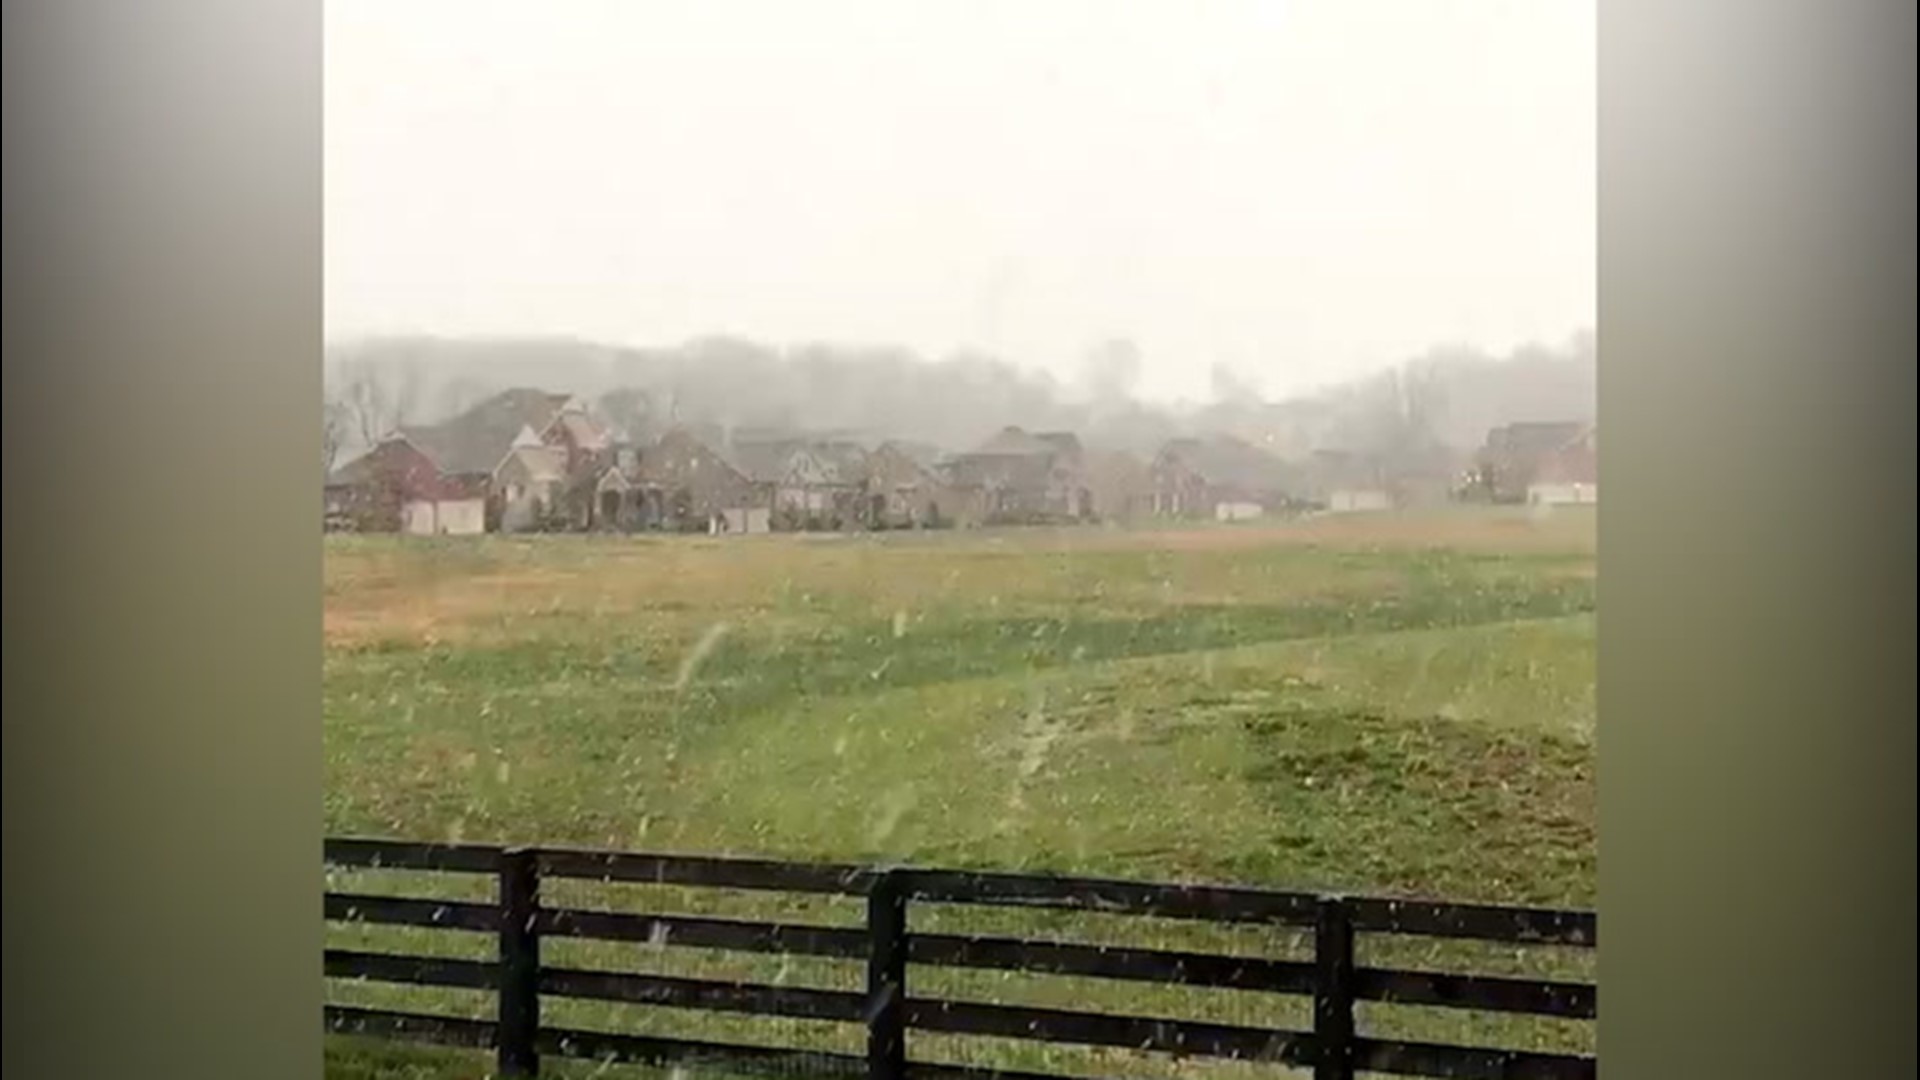 This neighborhood in Nashville, Tennessee, is getting greeted by a light dusting of snowfall on Feb. 20.